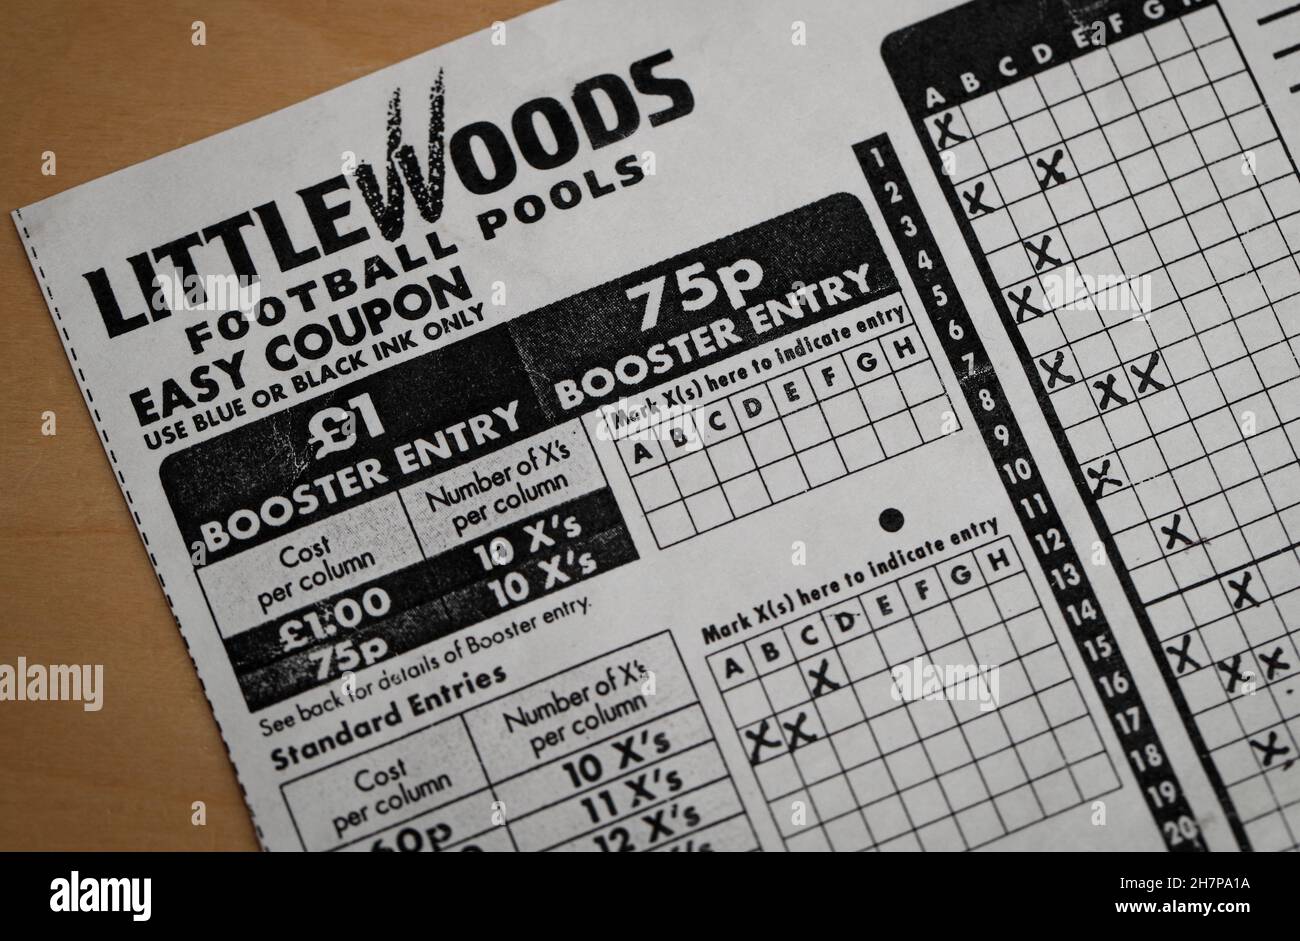 Coupon Littlewoods Football Pools Foto Stock